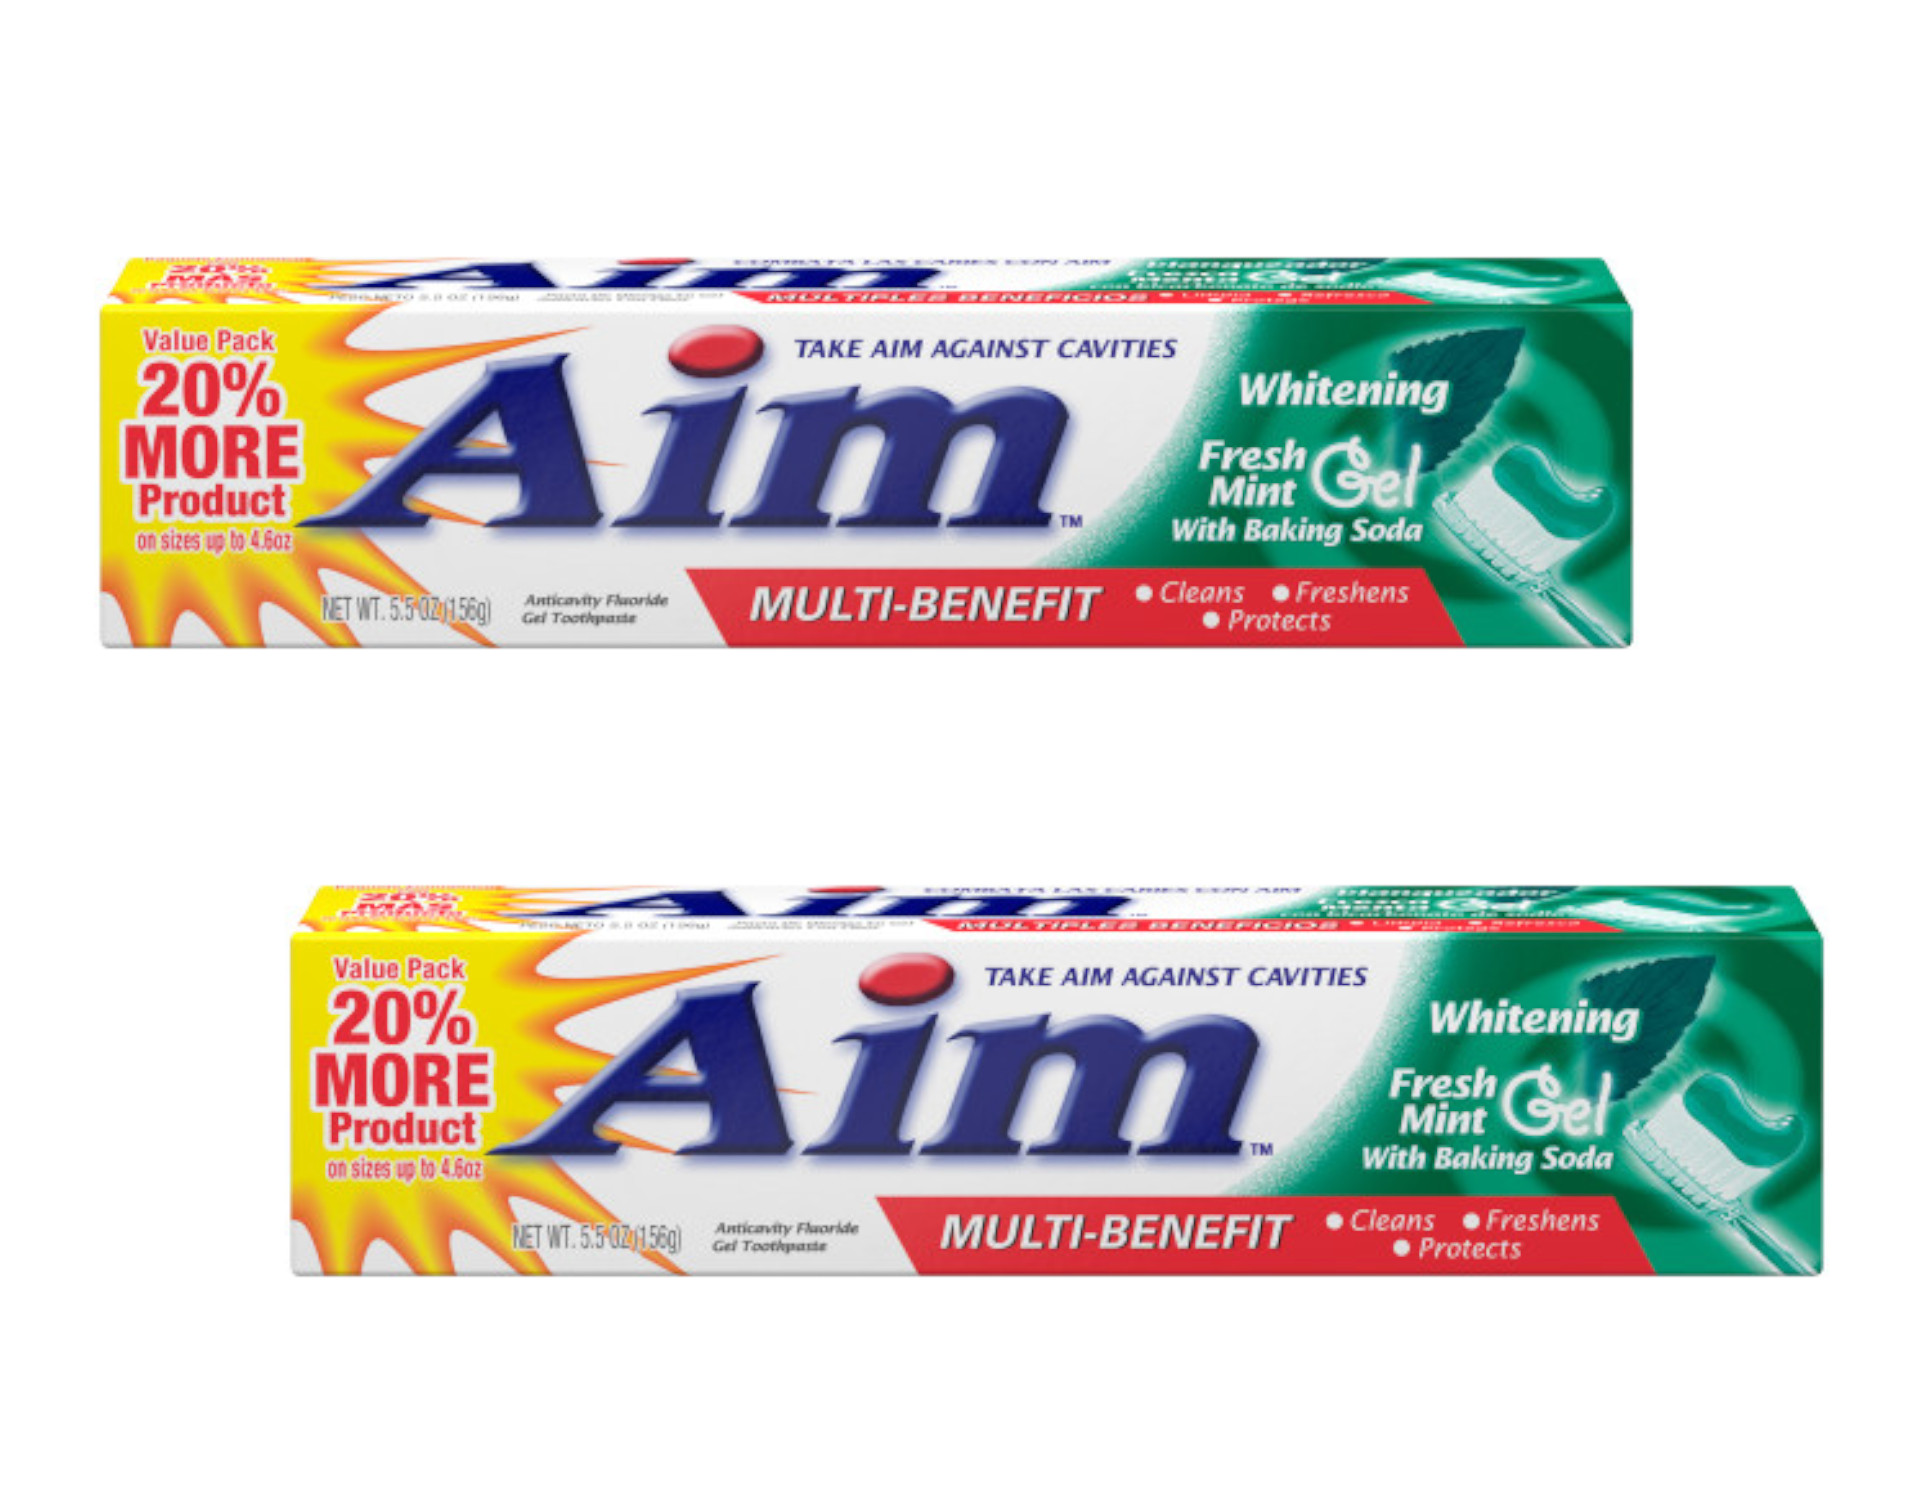 Aim Multi-Benefit Whitening Fresh Mint Gel Toothpaste with Baking Soda, 5.5 oz, 2 Pack - image 1 of 3